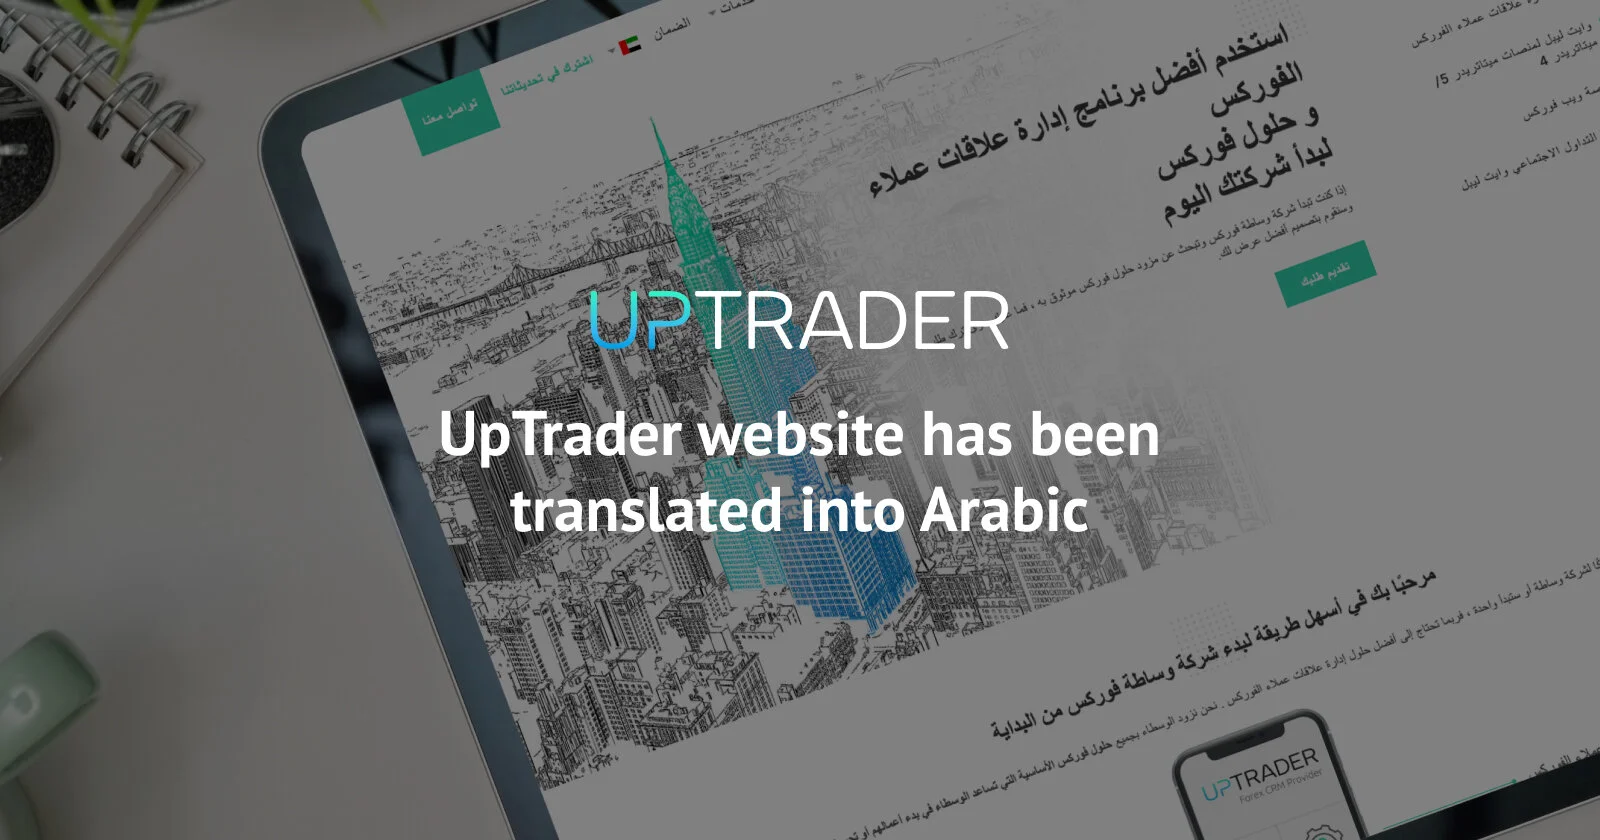 UpTrader Launches Arabic Version of Website